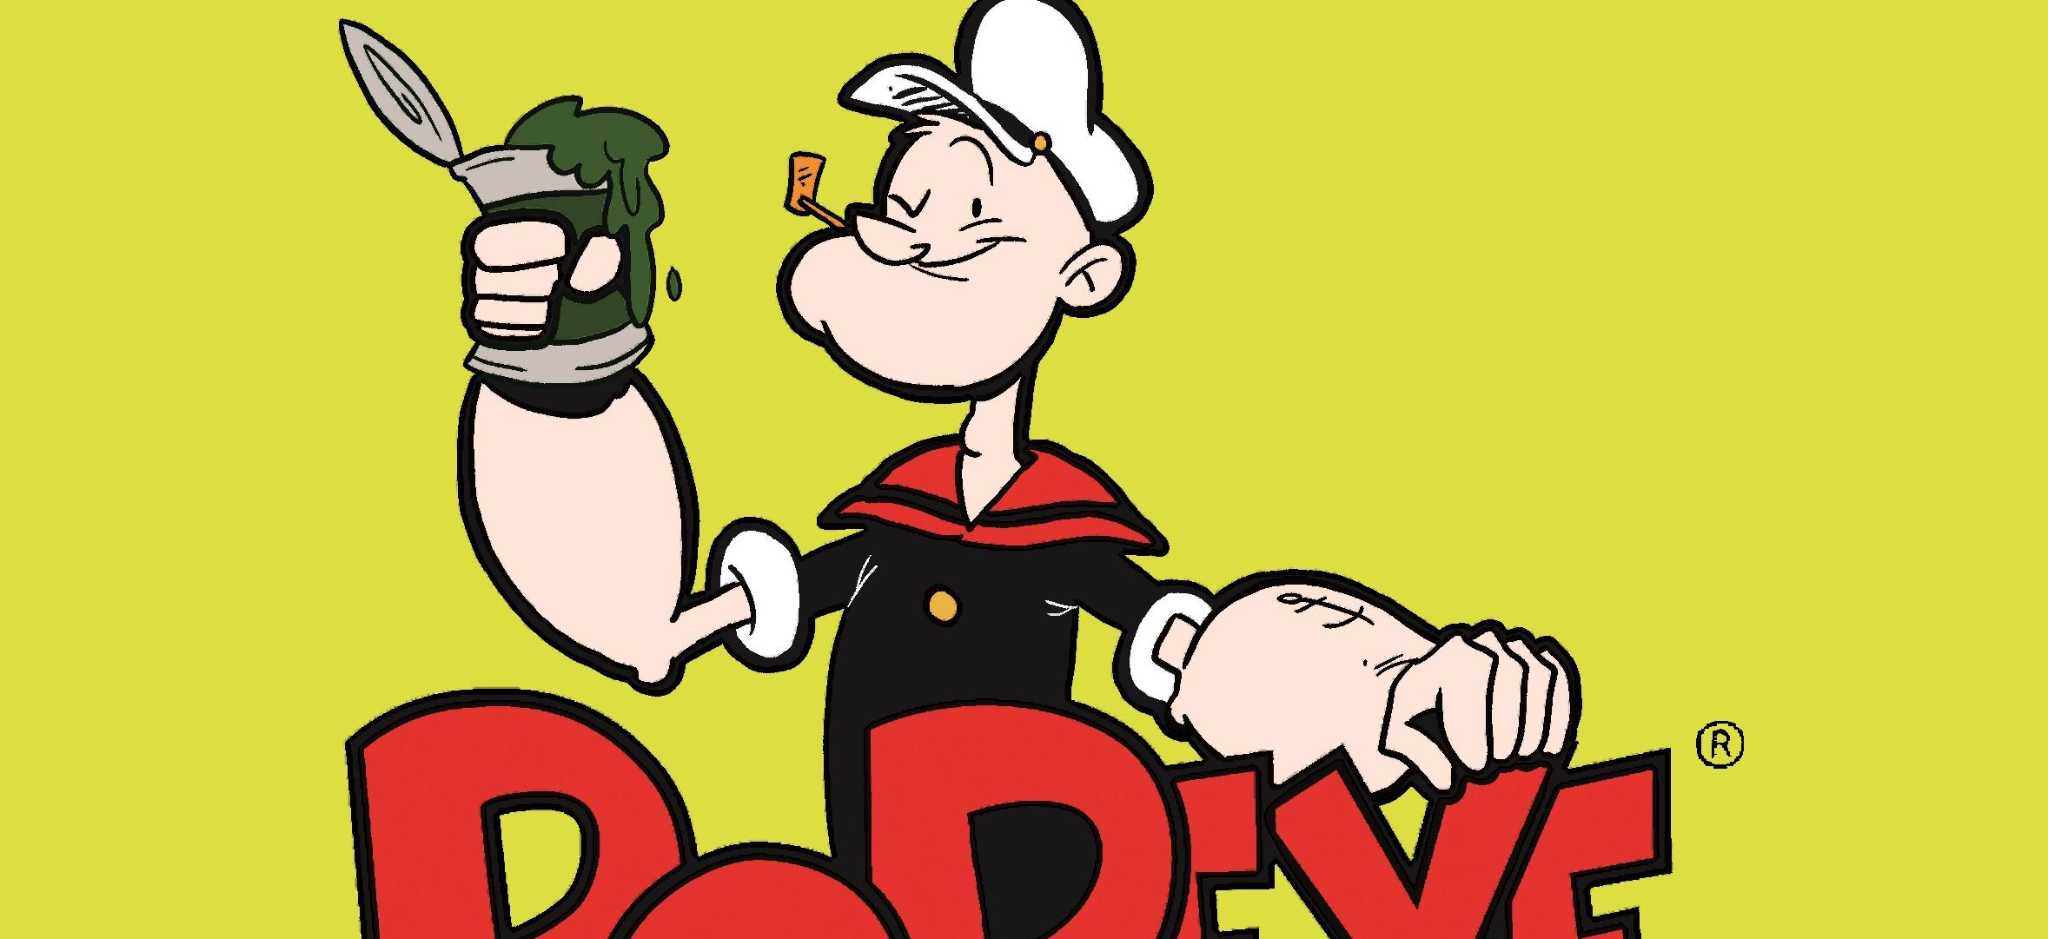 100+] Popeye Wallpapers | Wallpapers.com